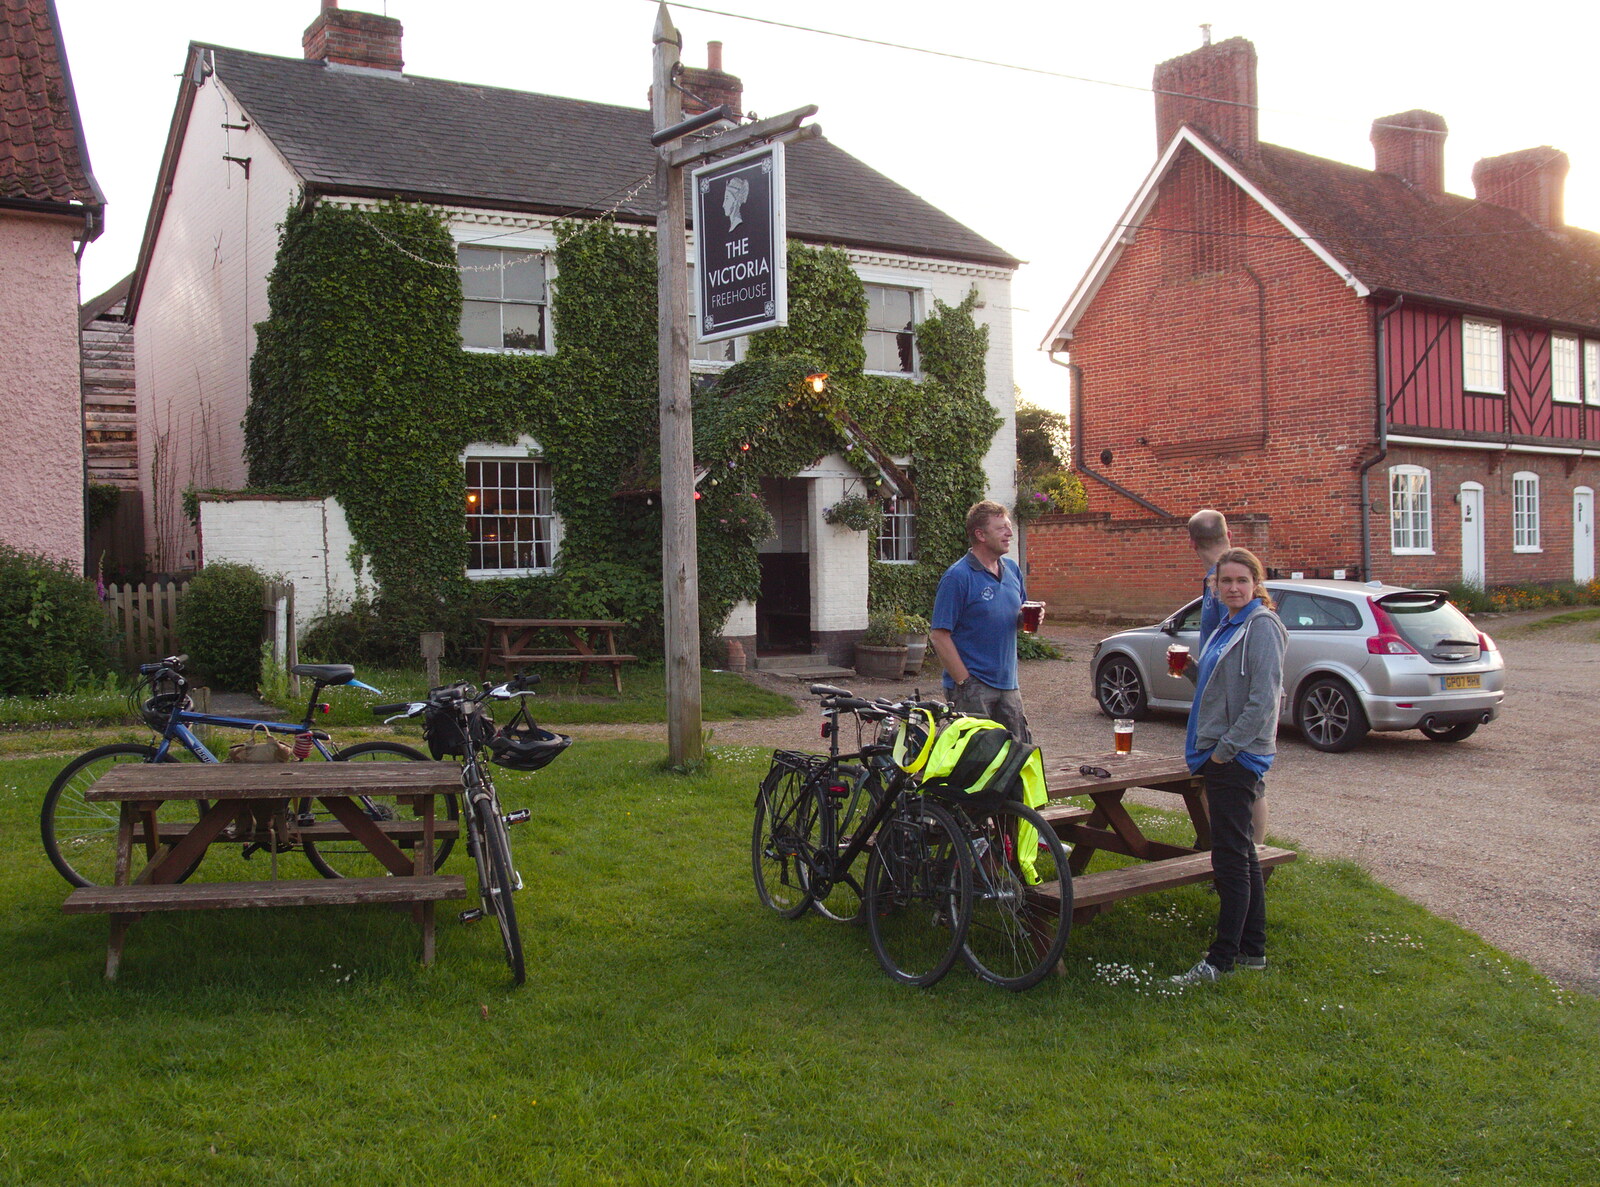 Gaz, Paul and Isobel outside The Victoria  from The BSCC at the Victoria, Earl Soham, Suffolk - 5th June 2014